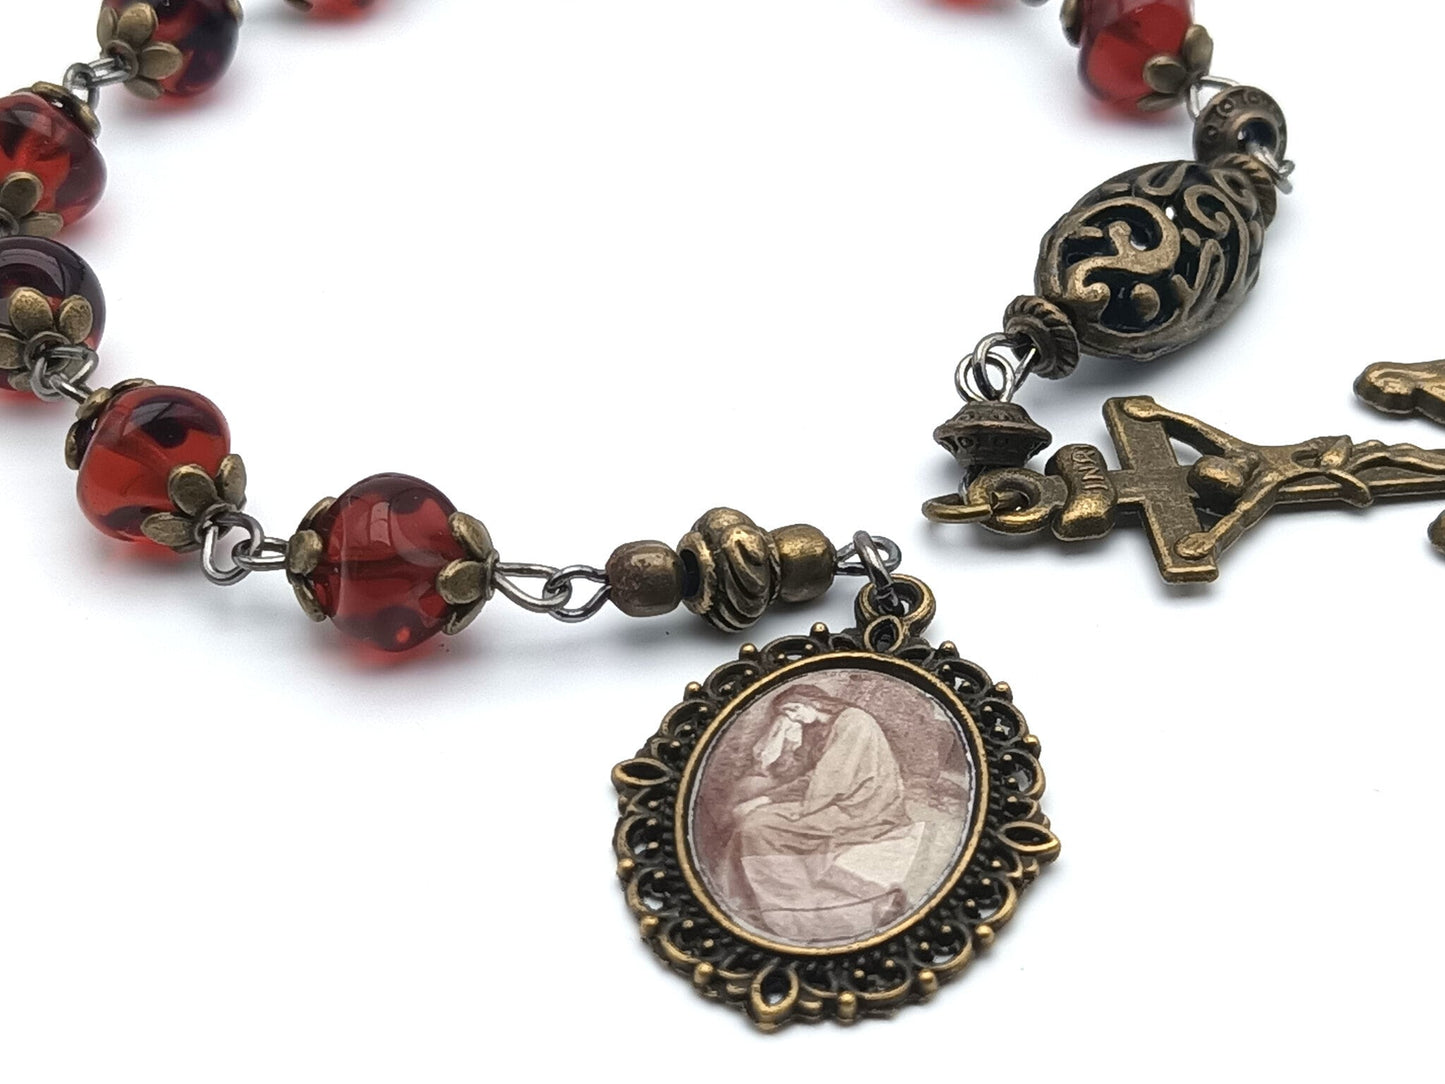 Saint Mary Magdalene unique rosary beads single decade or tenner rosary with red nugget glass beads, bronze bead caps, two Marys crucifix and picture medal.